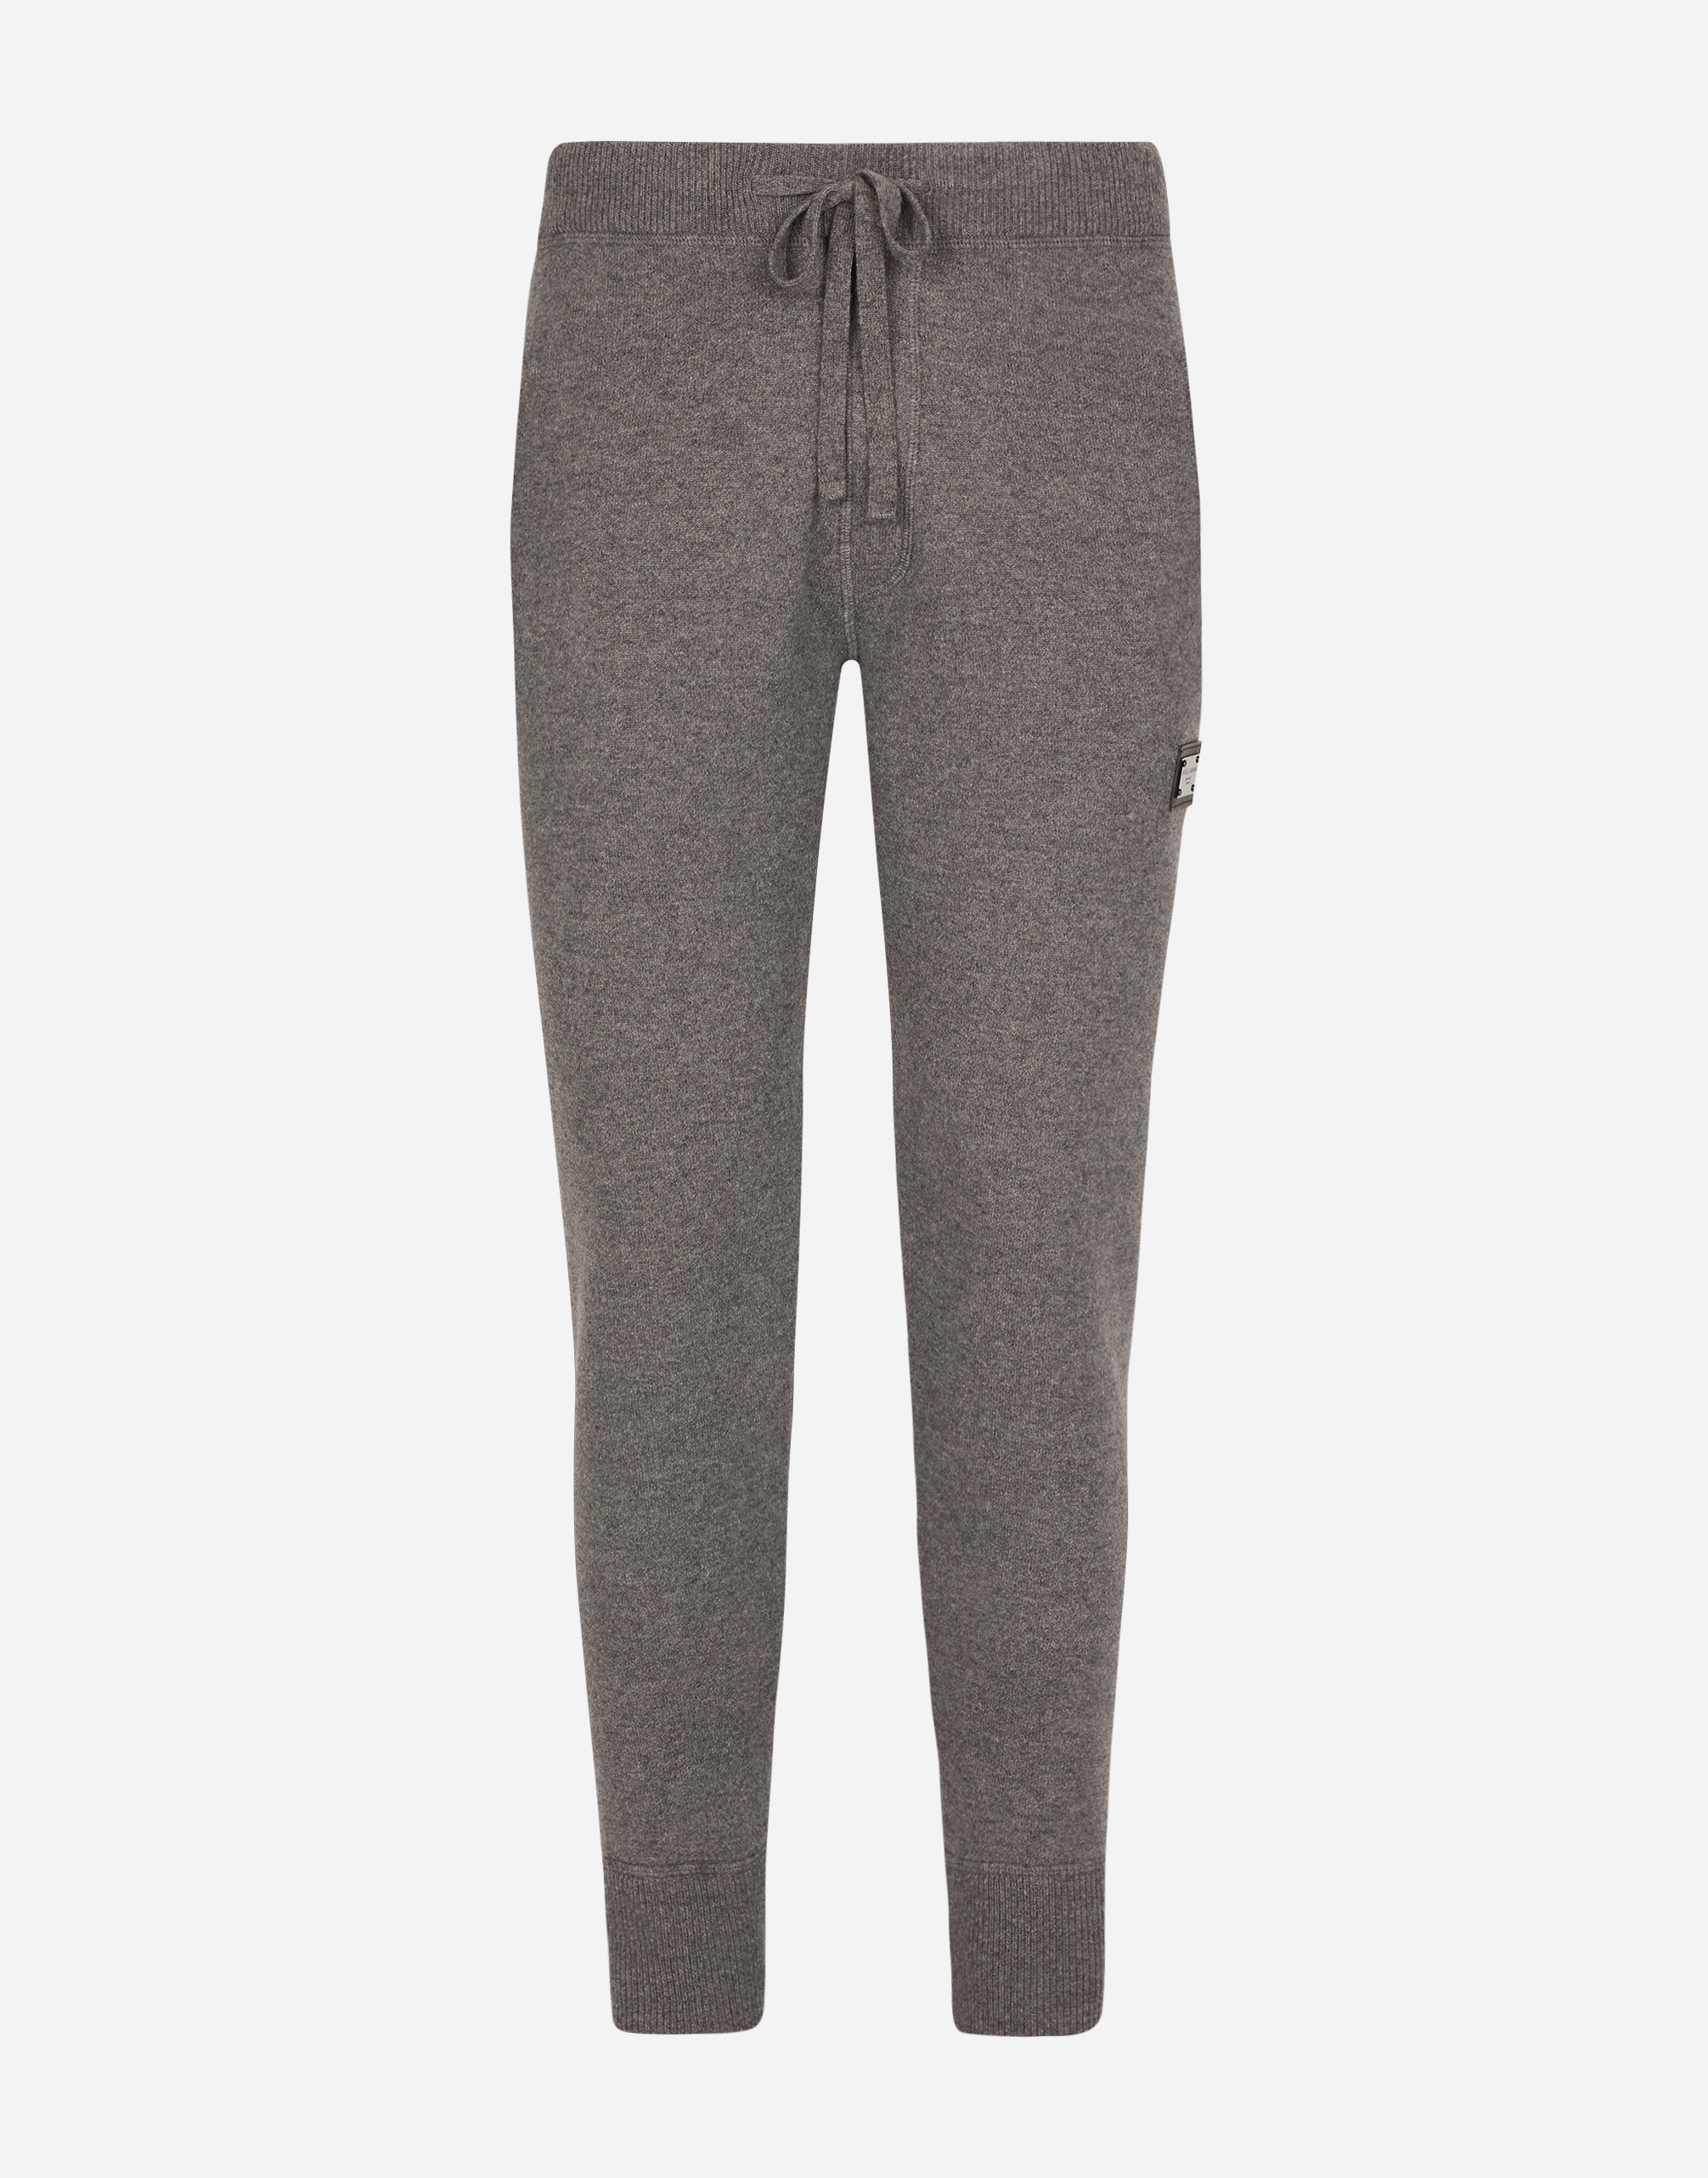 Dolce & Gabbana Wool And Cashmere Knit Jogging Pants In Grey